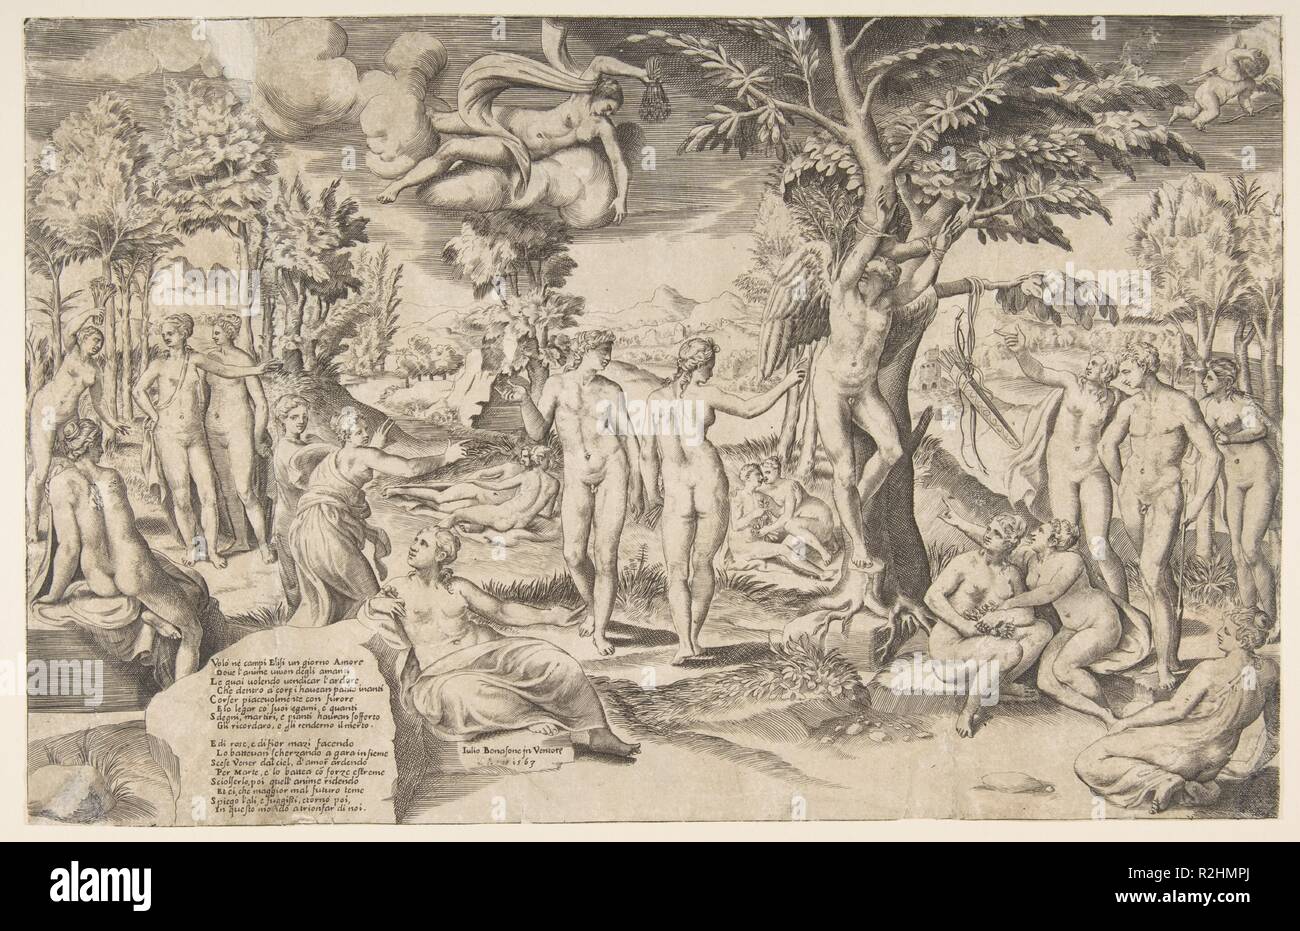 Cupid in the Elysian Fields tied to a tree in the centre, surrounded my many figures. Artist: Giulio Bonasone (Italian, active Rome and Bologna, 1531-after 1576). Dimensions: sheet: 9 x 14 1/16 in. (22.8 x 35.7 cm). Date: 1563. Museum: Metropolitan Museum of Art, New York, USA. Stock Photo